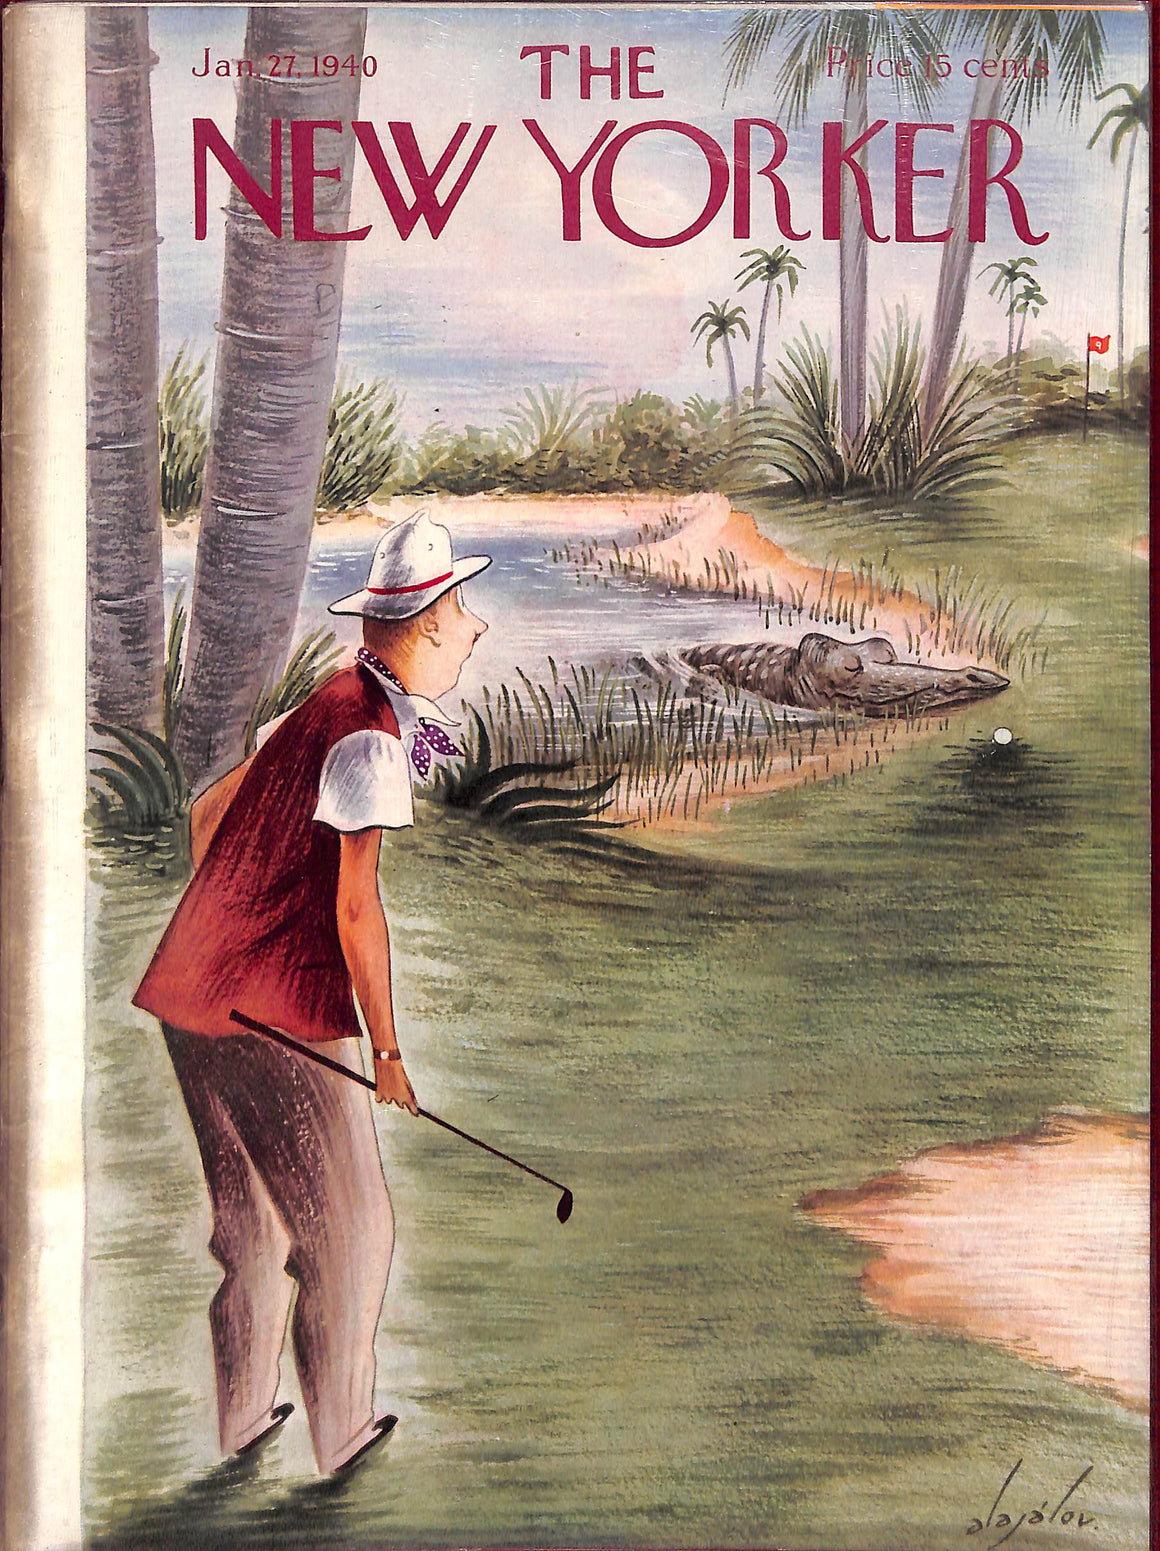 The New Yorker Jan. 27, 1940